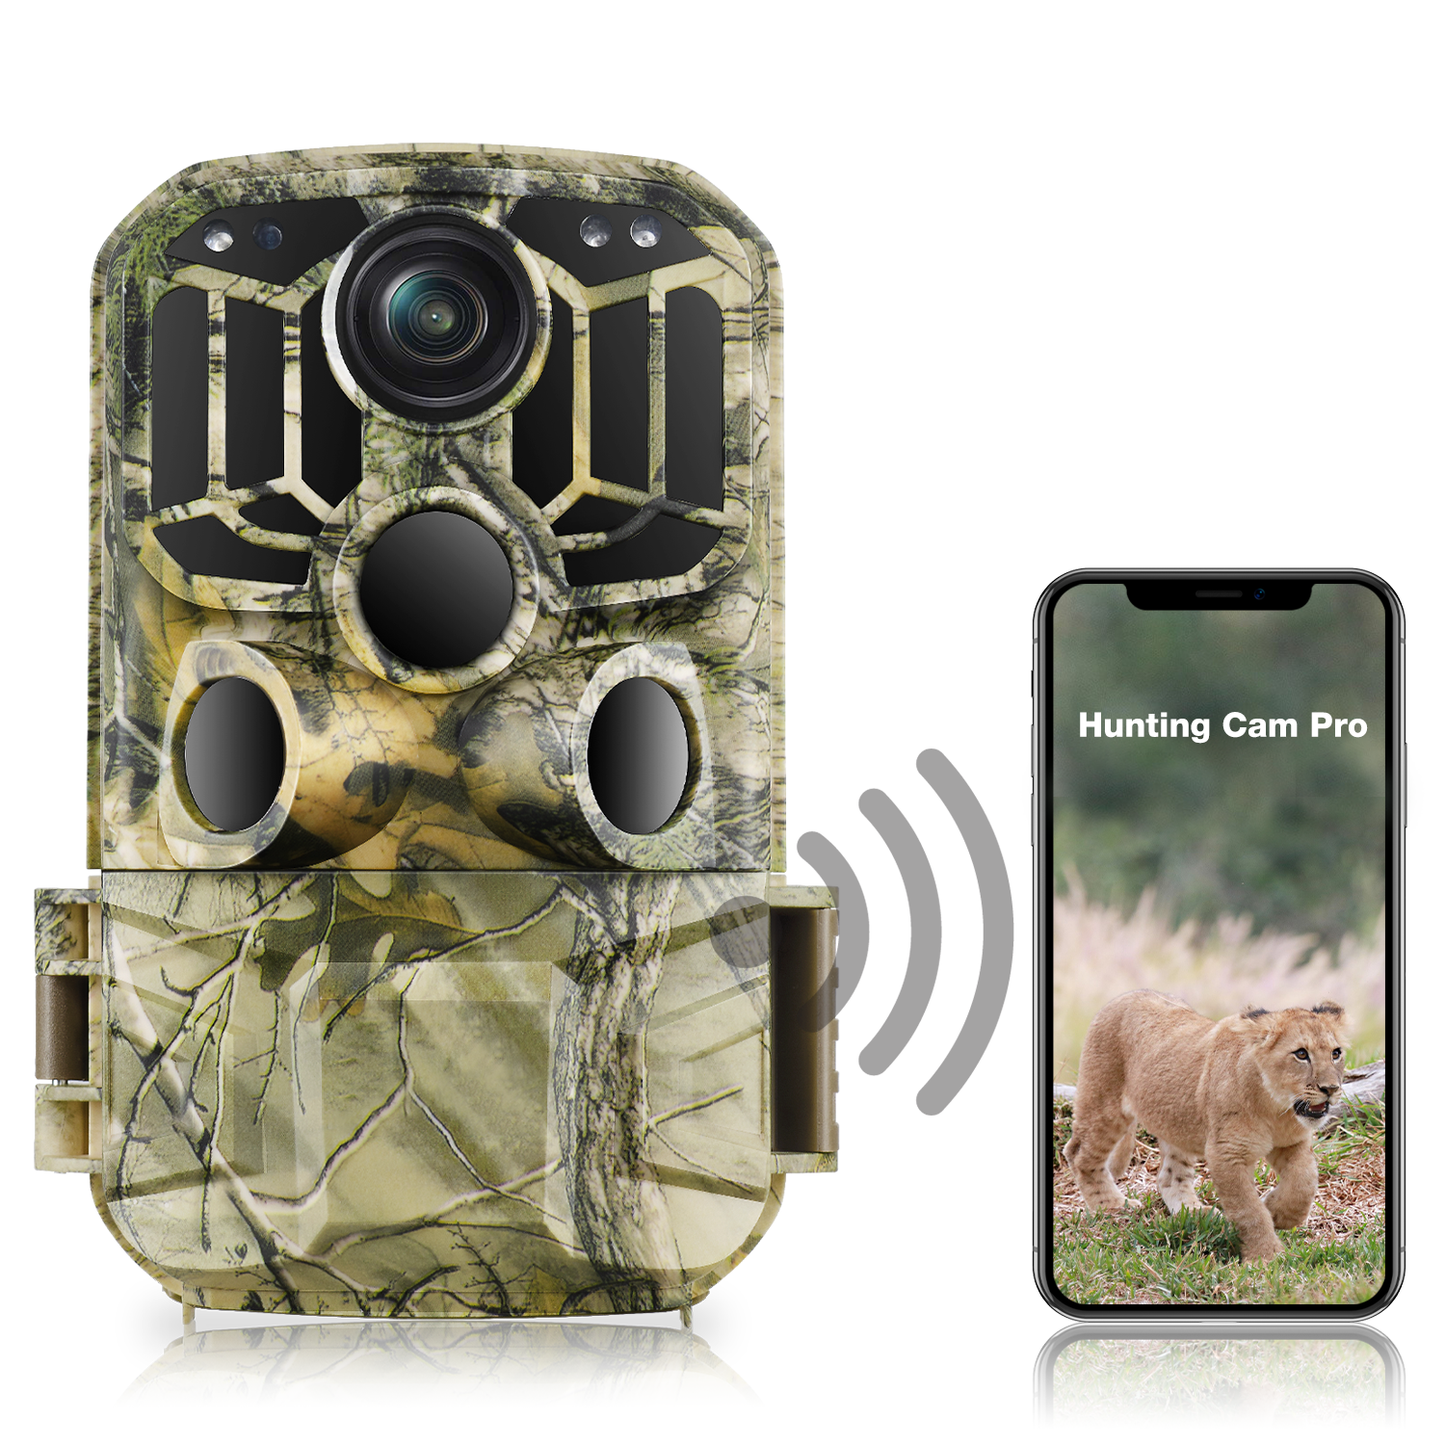 TOGUARD Trail Camera WiFi Bluetooth HD 1296P 20MP Game Deer Hunting Camera with 65FT Infrared Night Vision IP66 Waterproof 120° Wide-Angle Outdoor Trail Cam for Wildlife Monitoring 2.4"LCD